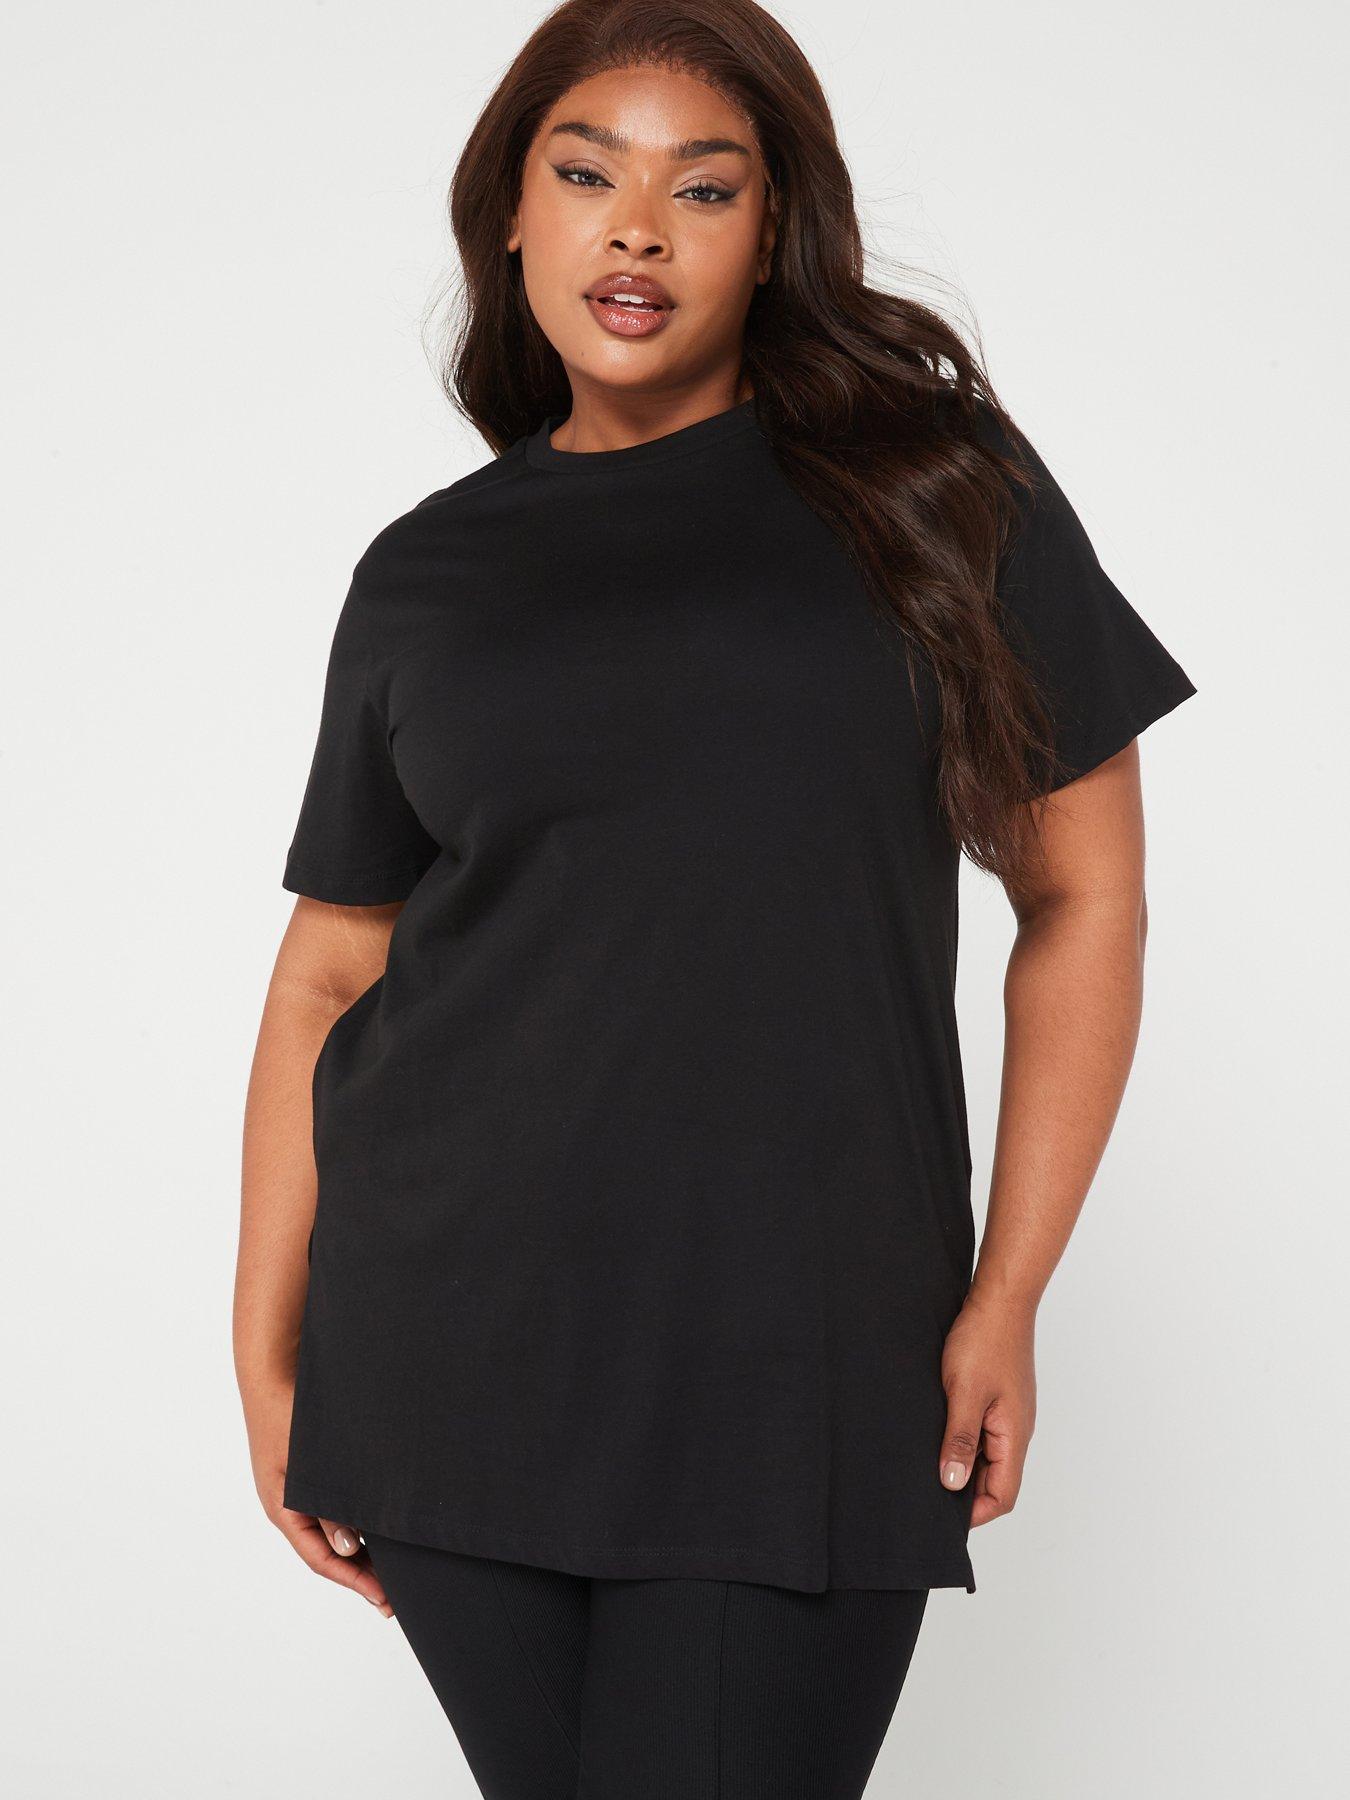 Plus Size Tunic Tops for Women, Going Out Tops for Women Casual Long Tunics  To Wear with Leggings Short Sleeve V Neck T Shirts Blouse Long Shirts for